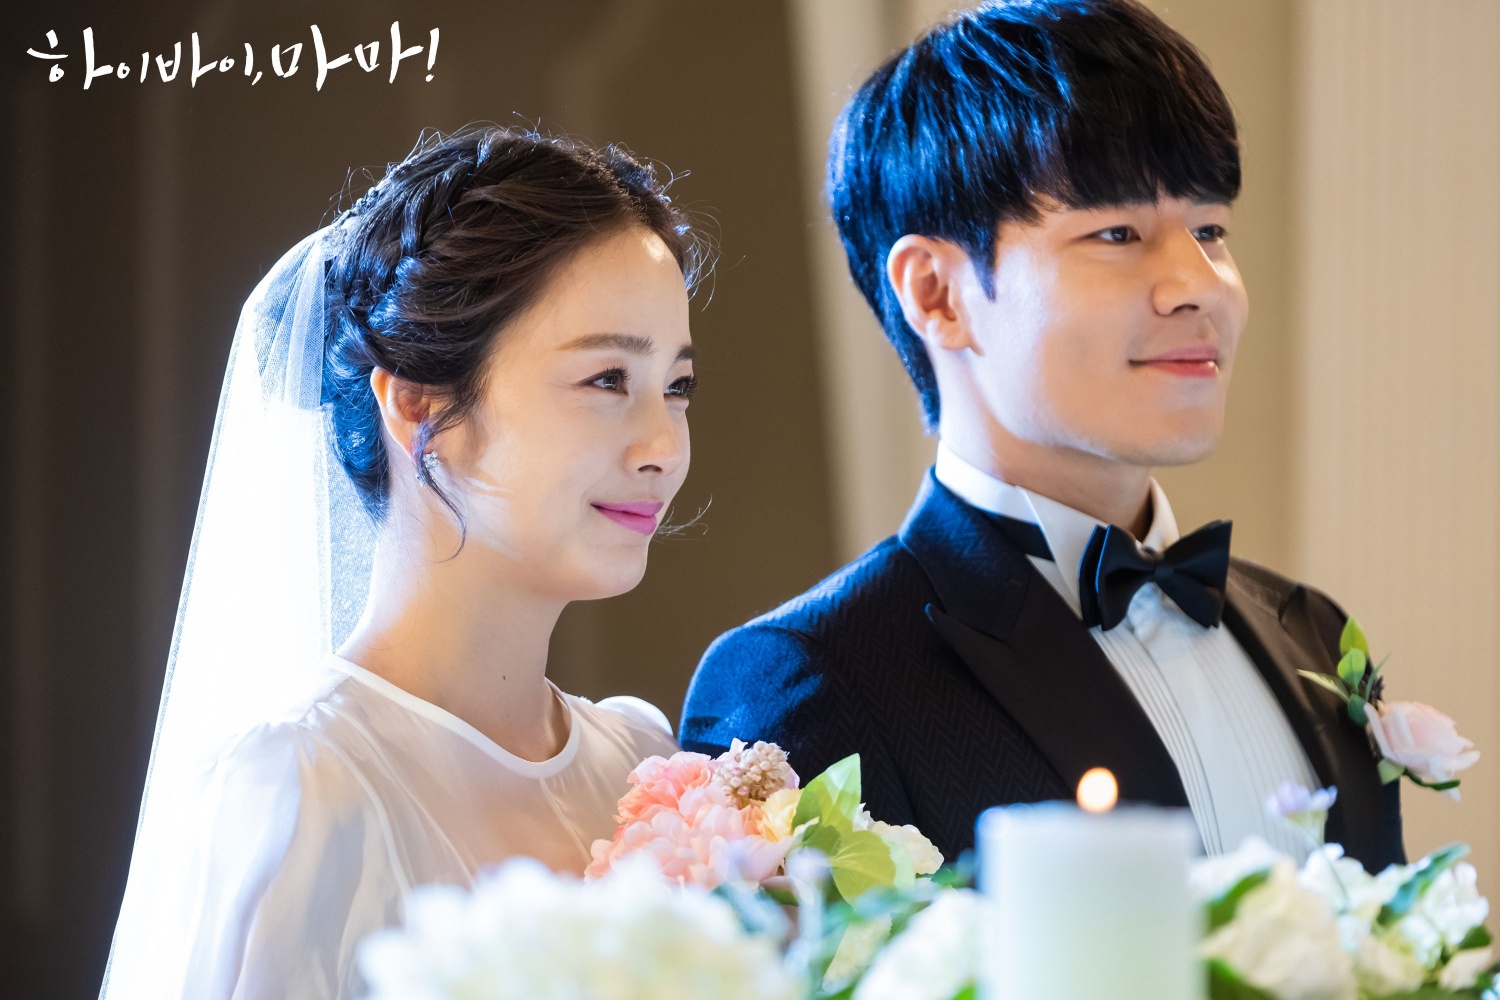 Kim Tae Hee And Lee Kyu Hyung Experience Love At First Sight In